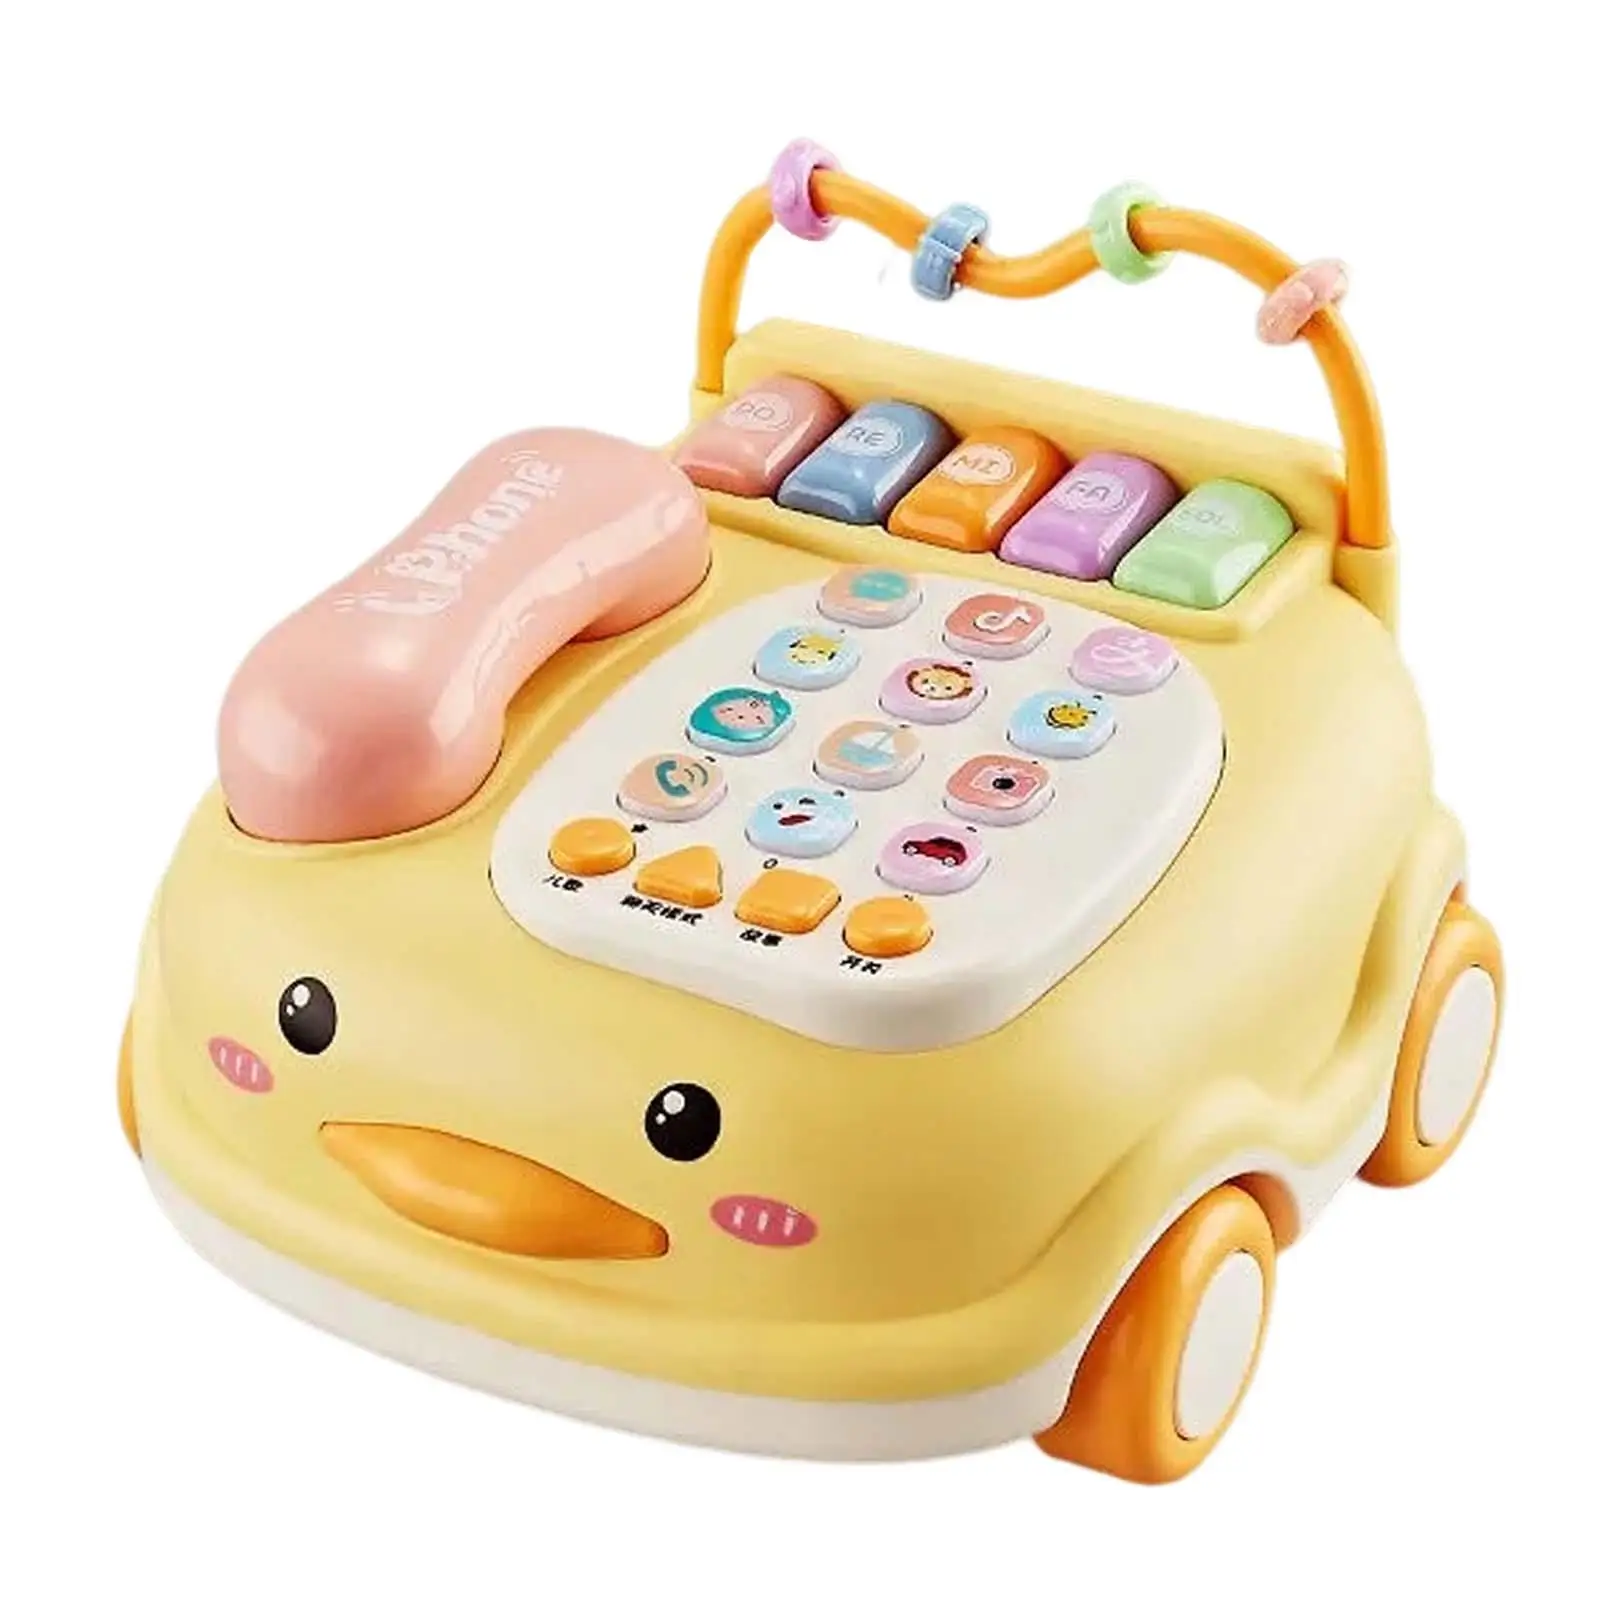 Montessori Toy Baby Musical Toy Early Learning Toy Baby Phone Toy for Creative Gift Early Education Gift Children 3 Years Old